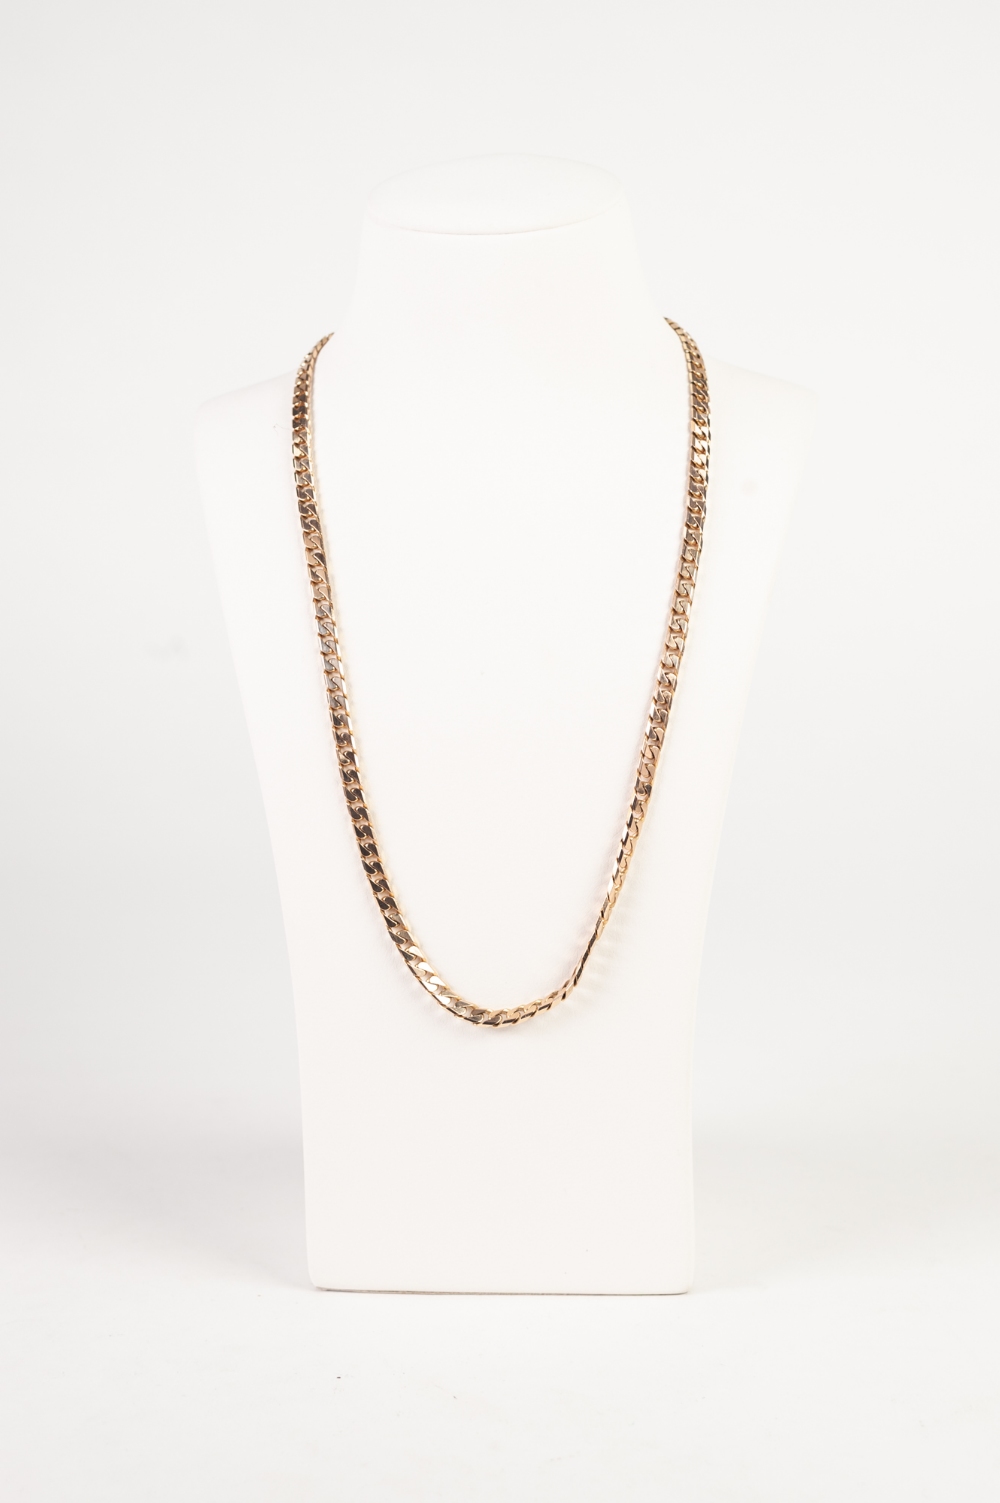 9ct GOLD CHAIN NECKLACE, flat 'S' shaped links, 22" long, 36gms